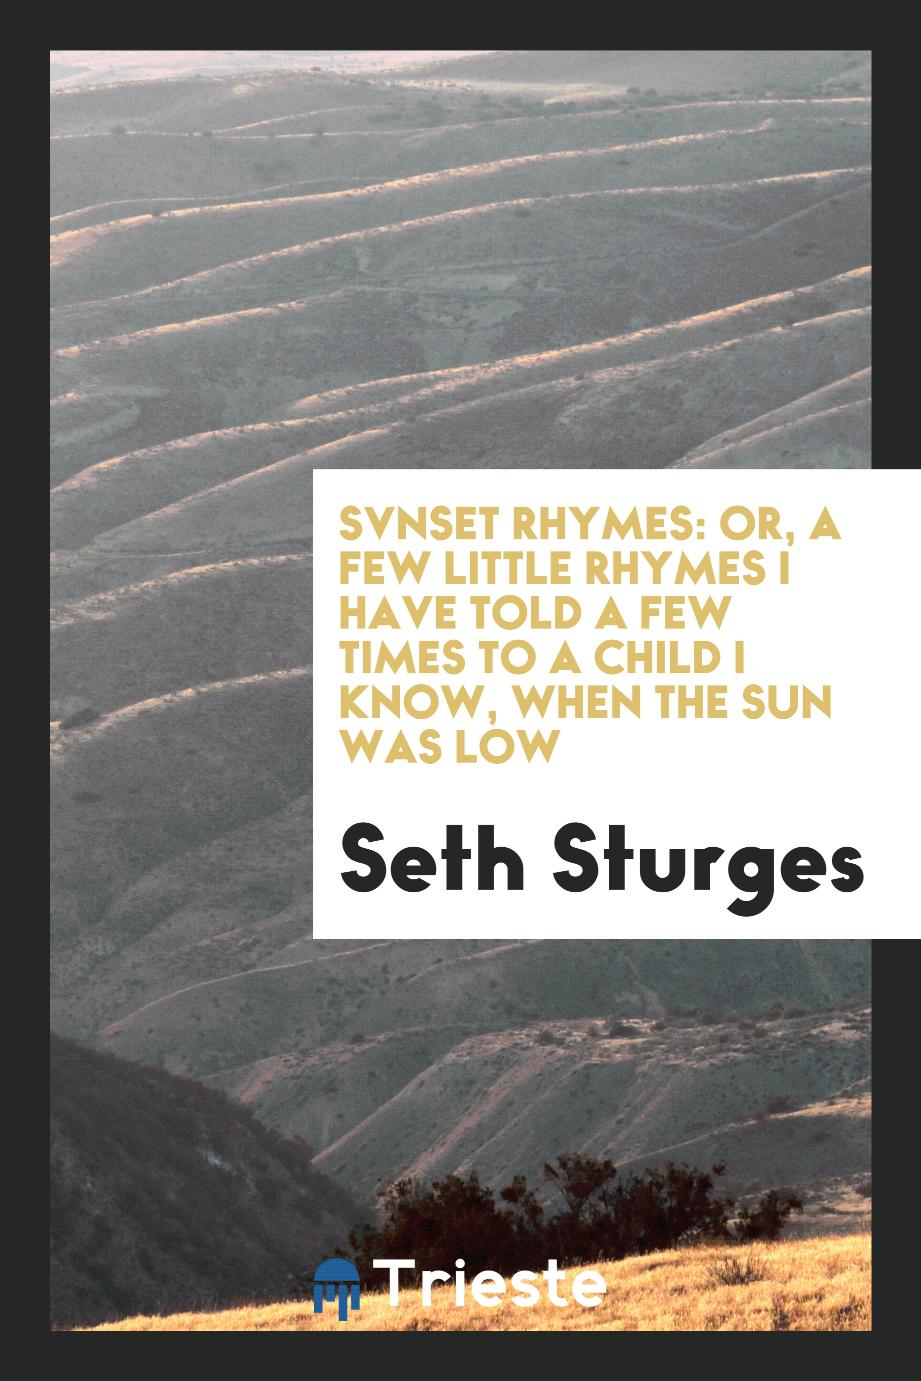 Svnset Rhymes: Or, a Few Little Rhymes I Have Told a Few Times to a Child I Know, When the Sun Was Low